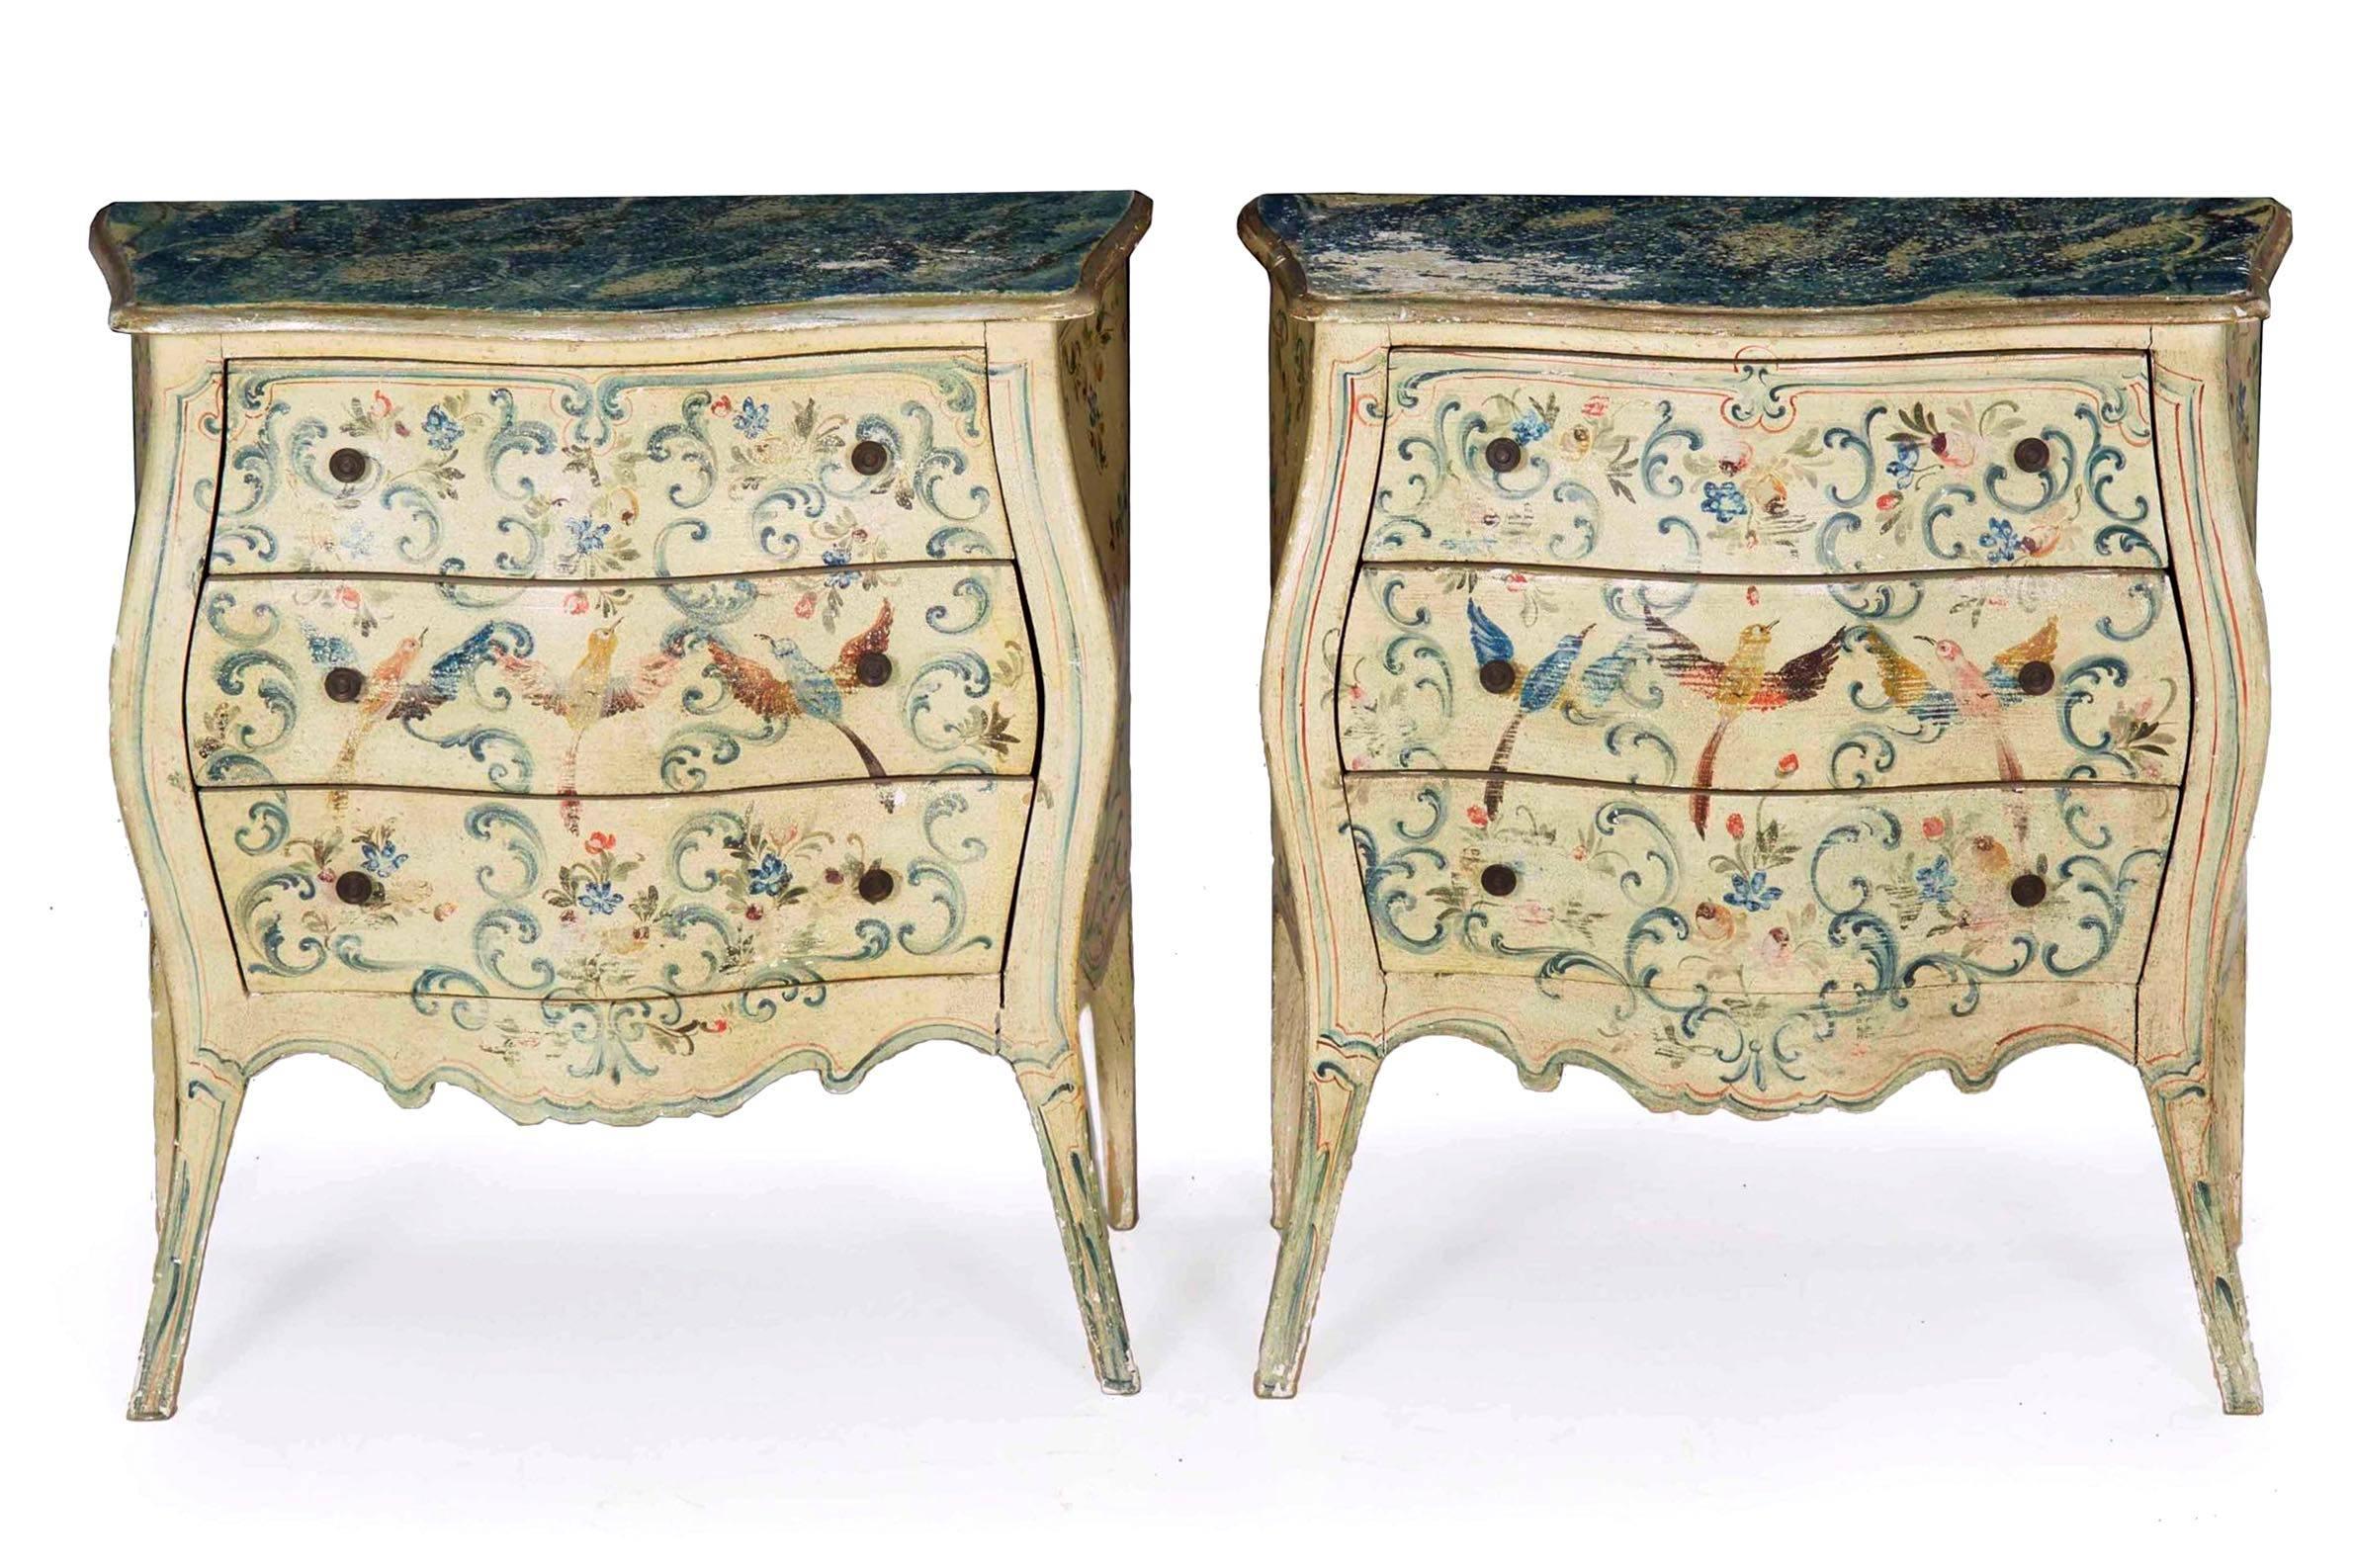 A whimsical and delightful pair of chests with perfectly diminutive proportions, these are such a wonderful pair to flank a bed with restrained sizes and practical storage. The old paint is worn and crackled from years of gentle use, the hummingbird